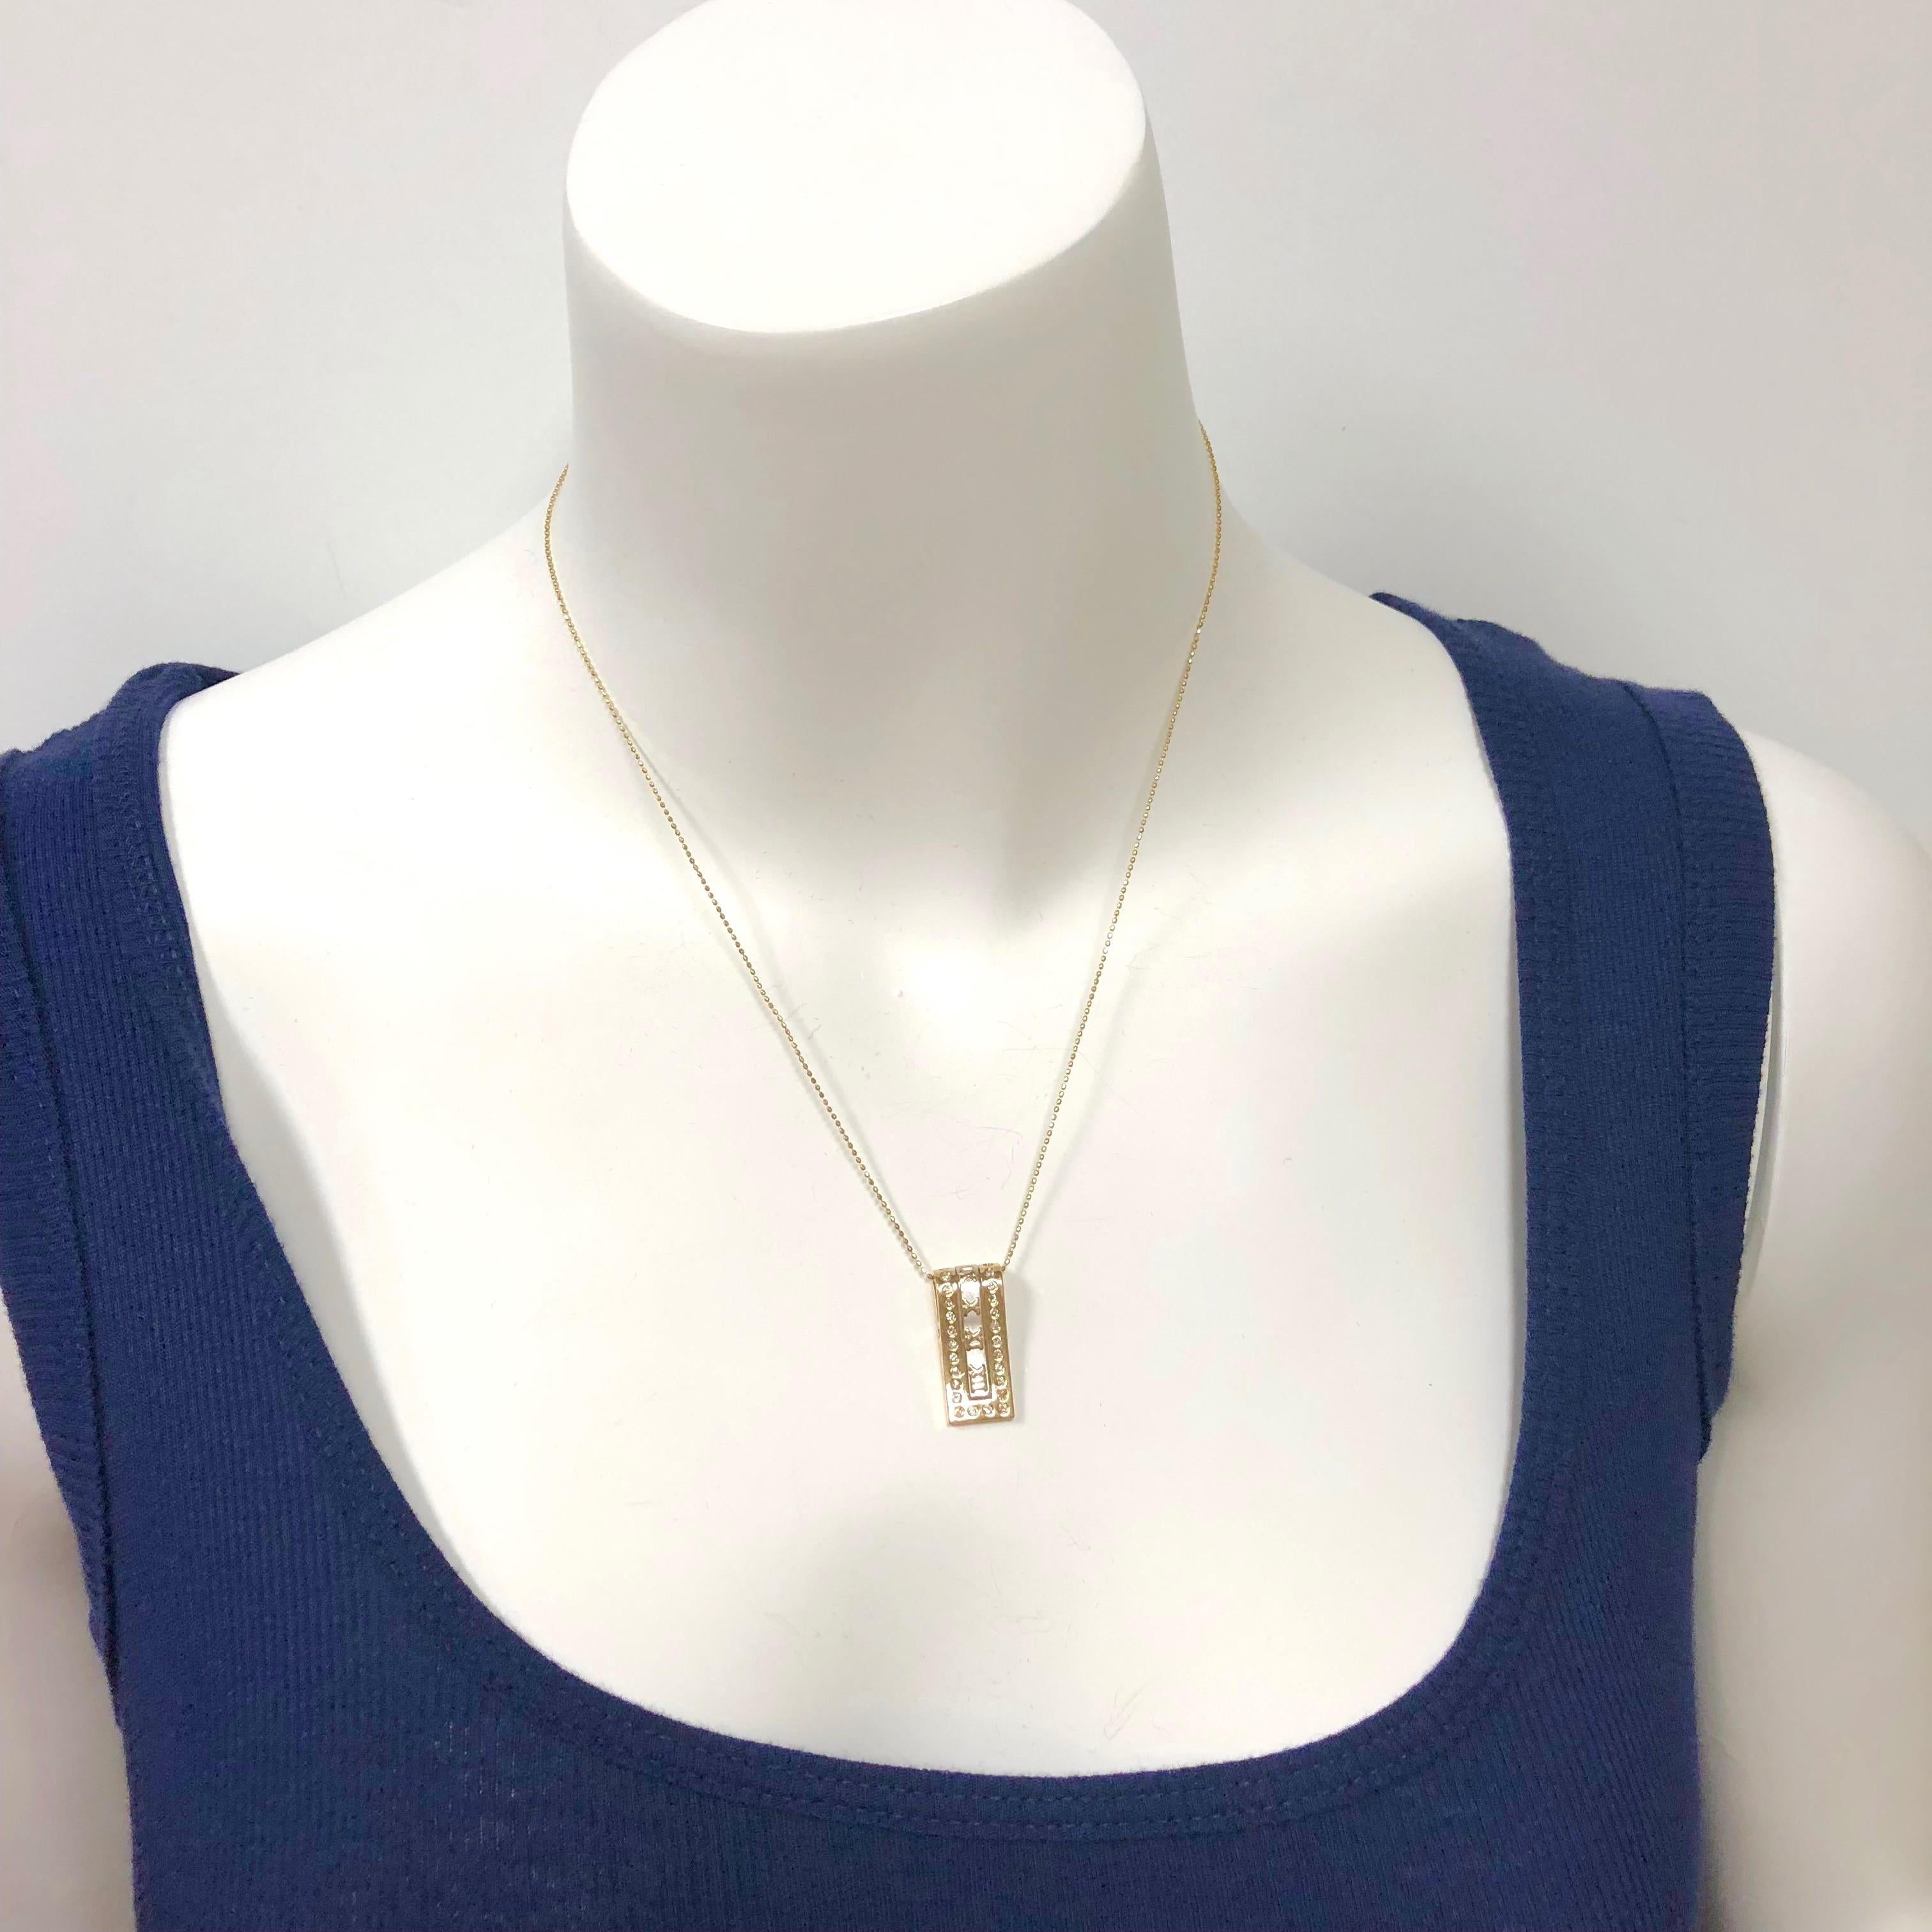 Two-Tone Gold Diamond Slide Pendant Necklace In Excellent Condition For Sale In Agoura Hills, CA